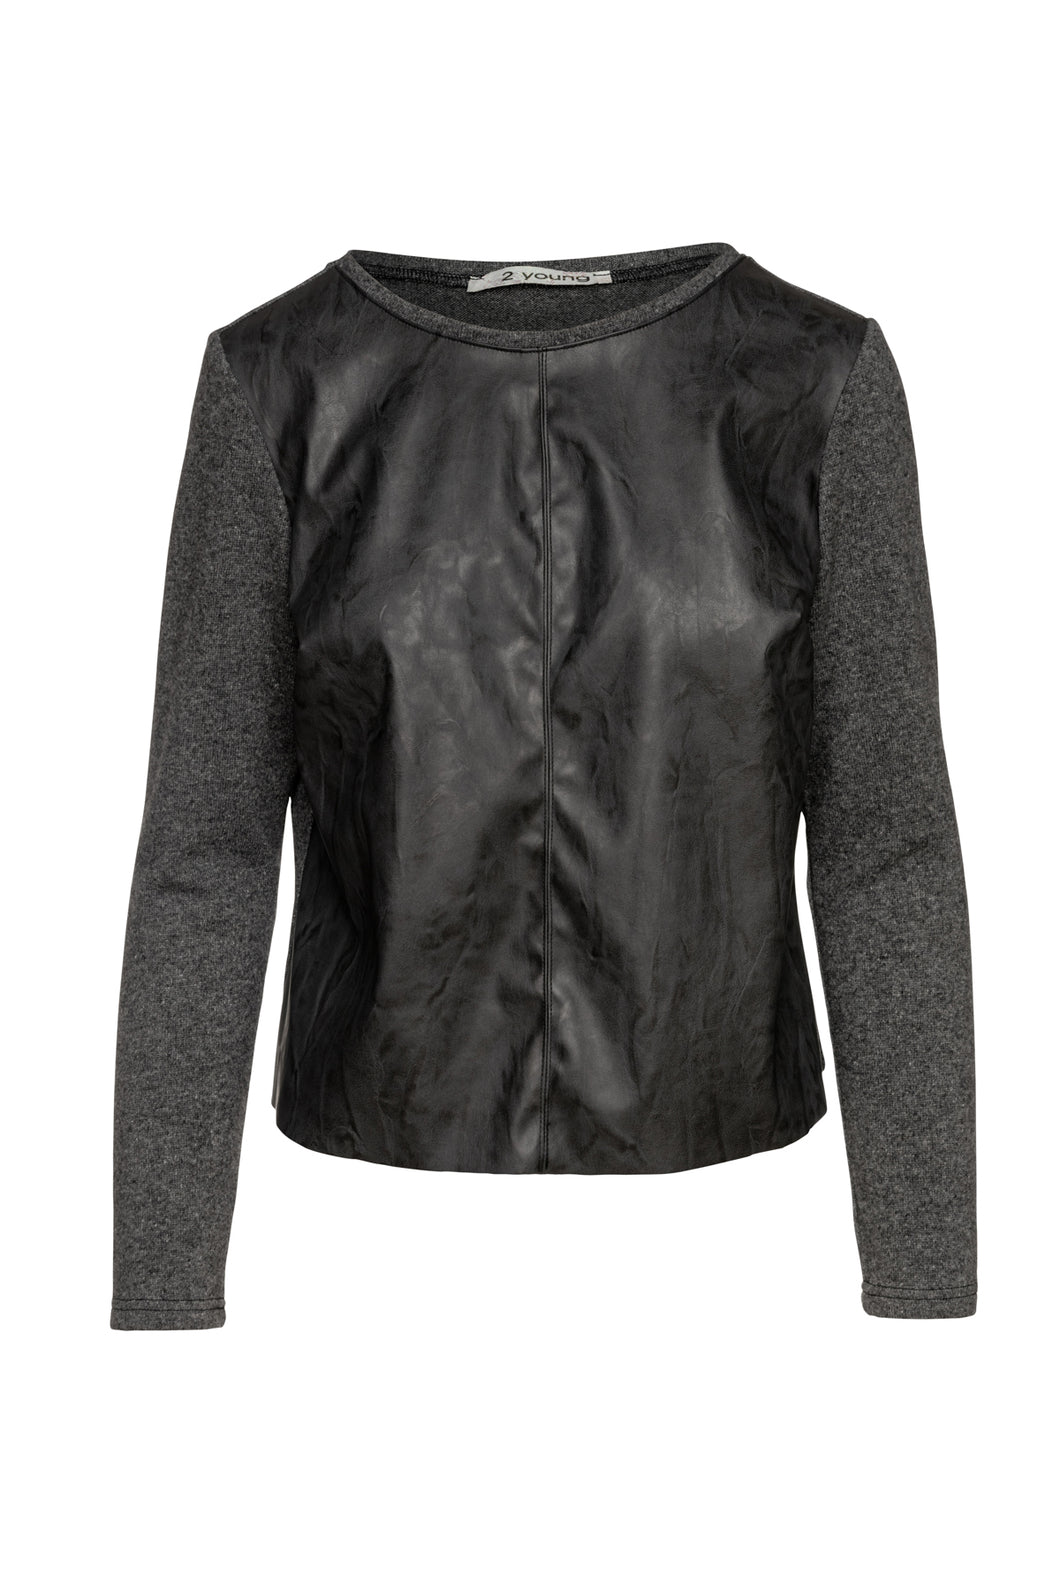 Dark Grey Faux Leather Detail Top